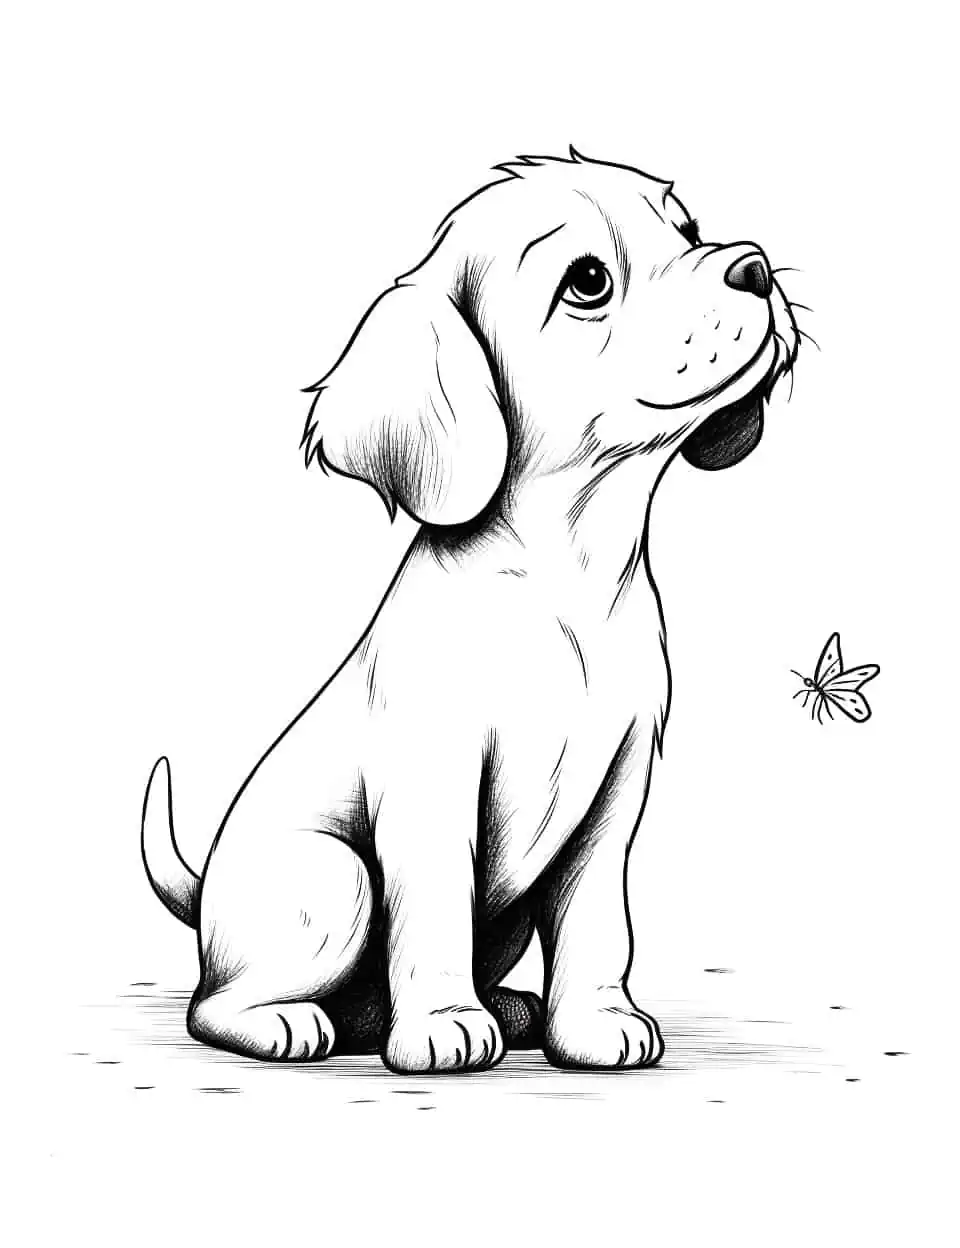 Baby Dog and the Butterfly Coloring Page - A baby dog looking in awe at a butterfly flying towards it.